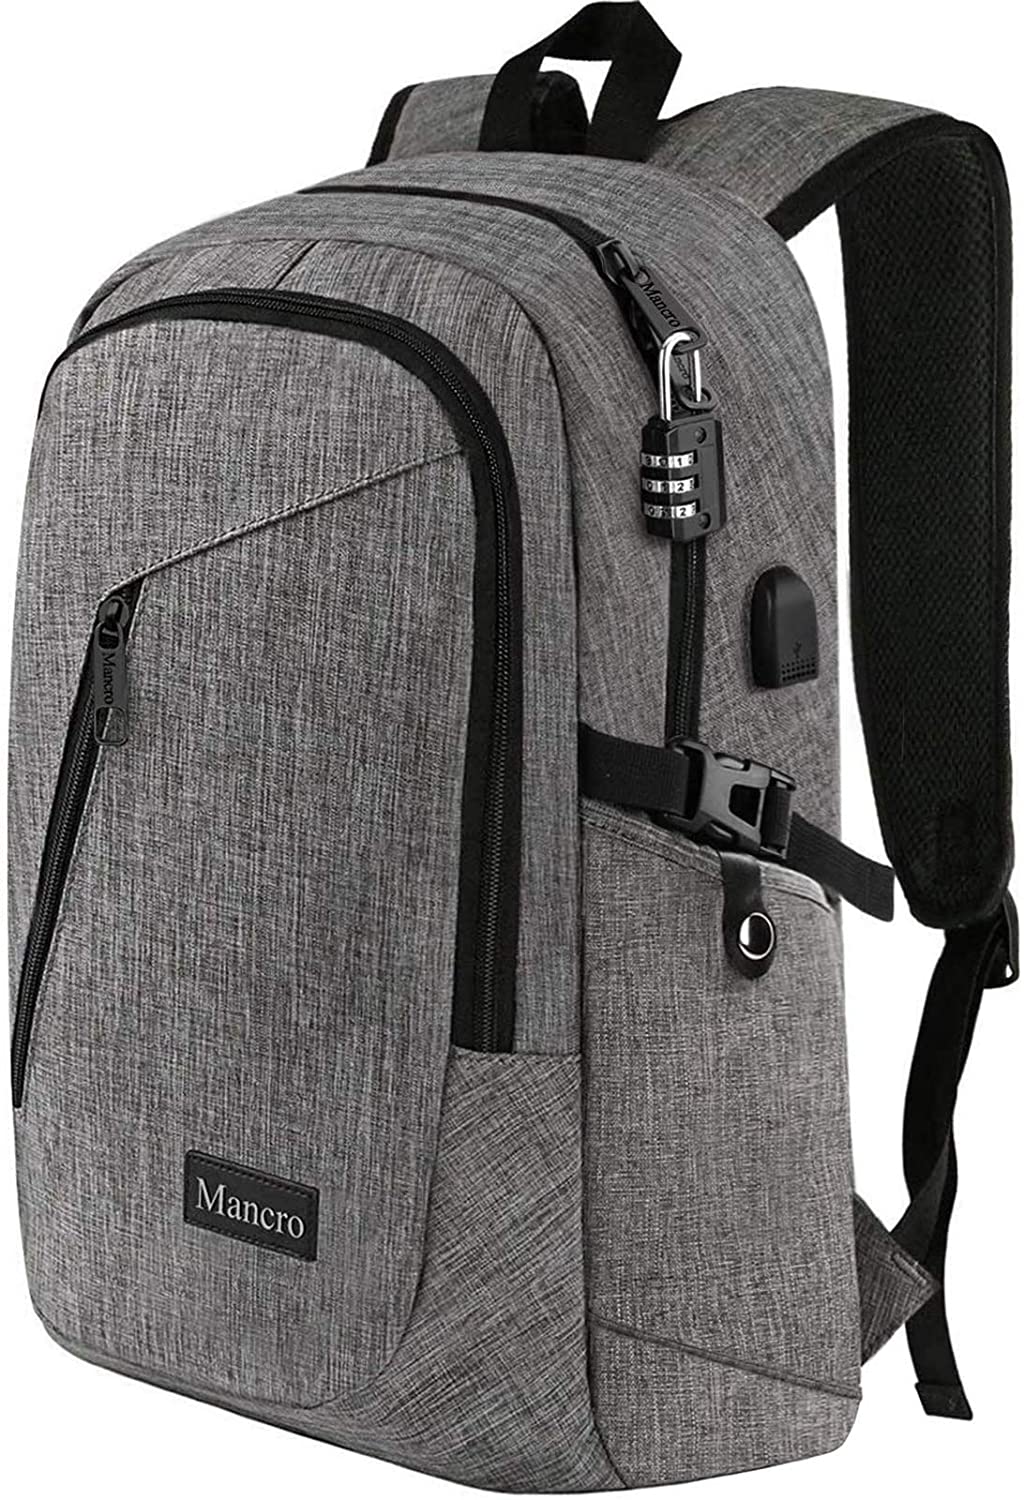 Mancro Laptop Backpack, Business Water Resistant Laptop bag Backpack Gift for Men Women with USB Charging Port, Anti Theft College School Bookbag, Travel Computer Bag for 15.6 Inch Laptops,Grey